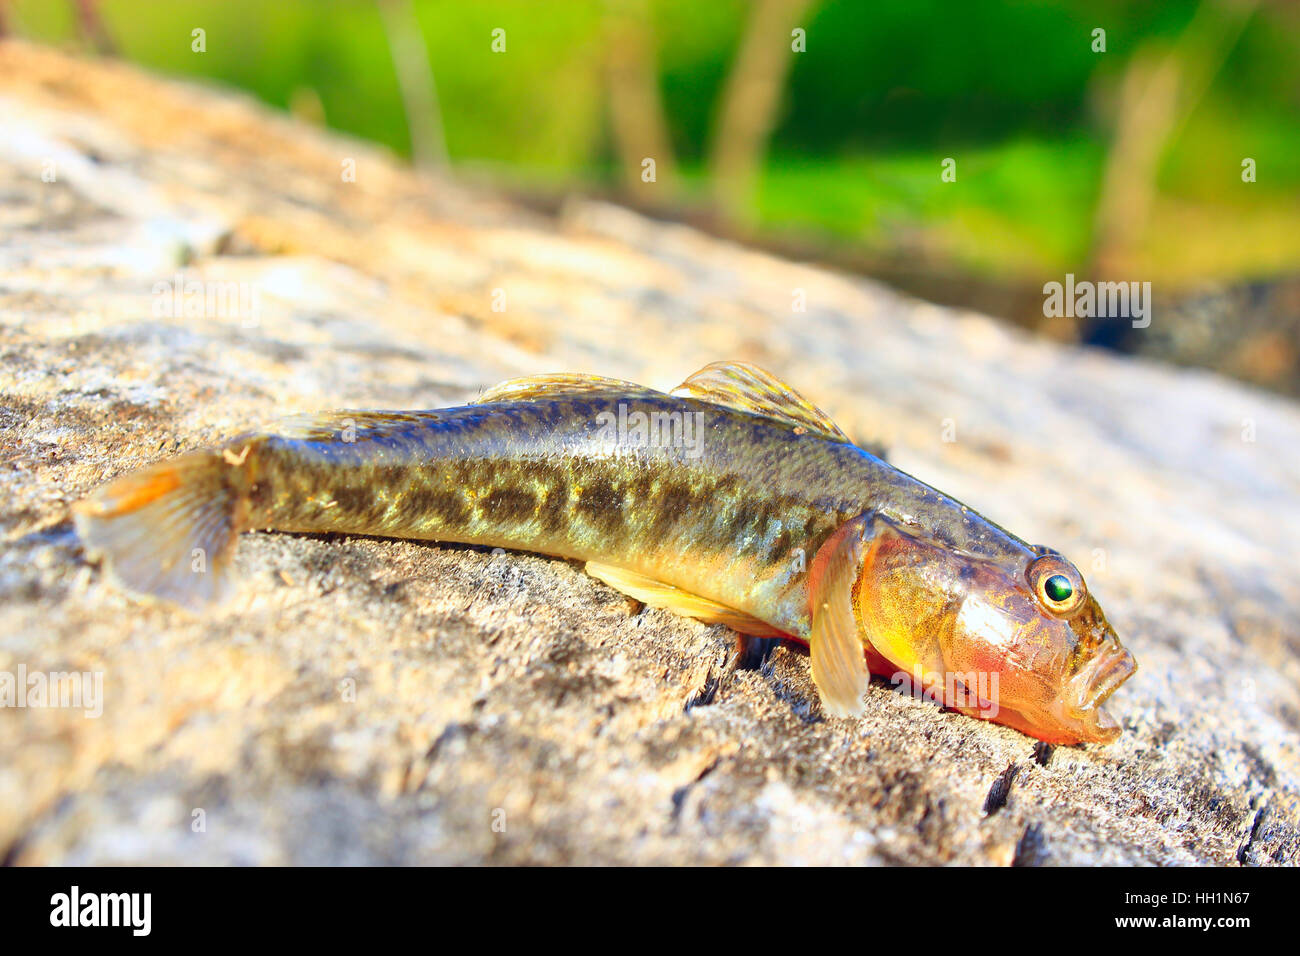 small caught grey gudgeon on the wooden surface Stock Photo